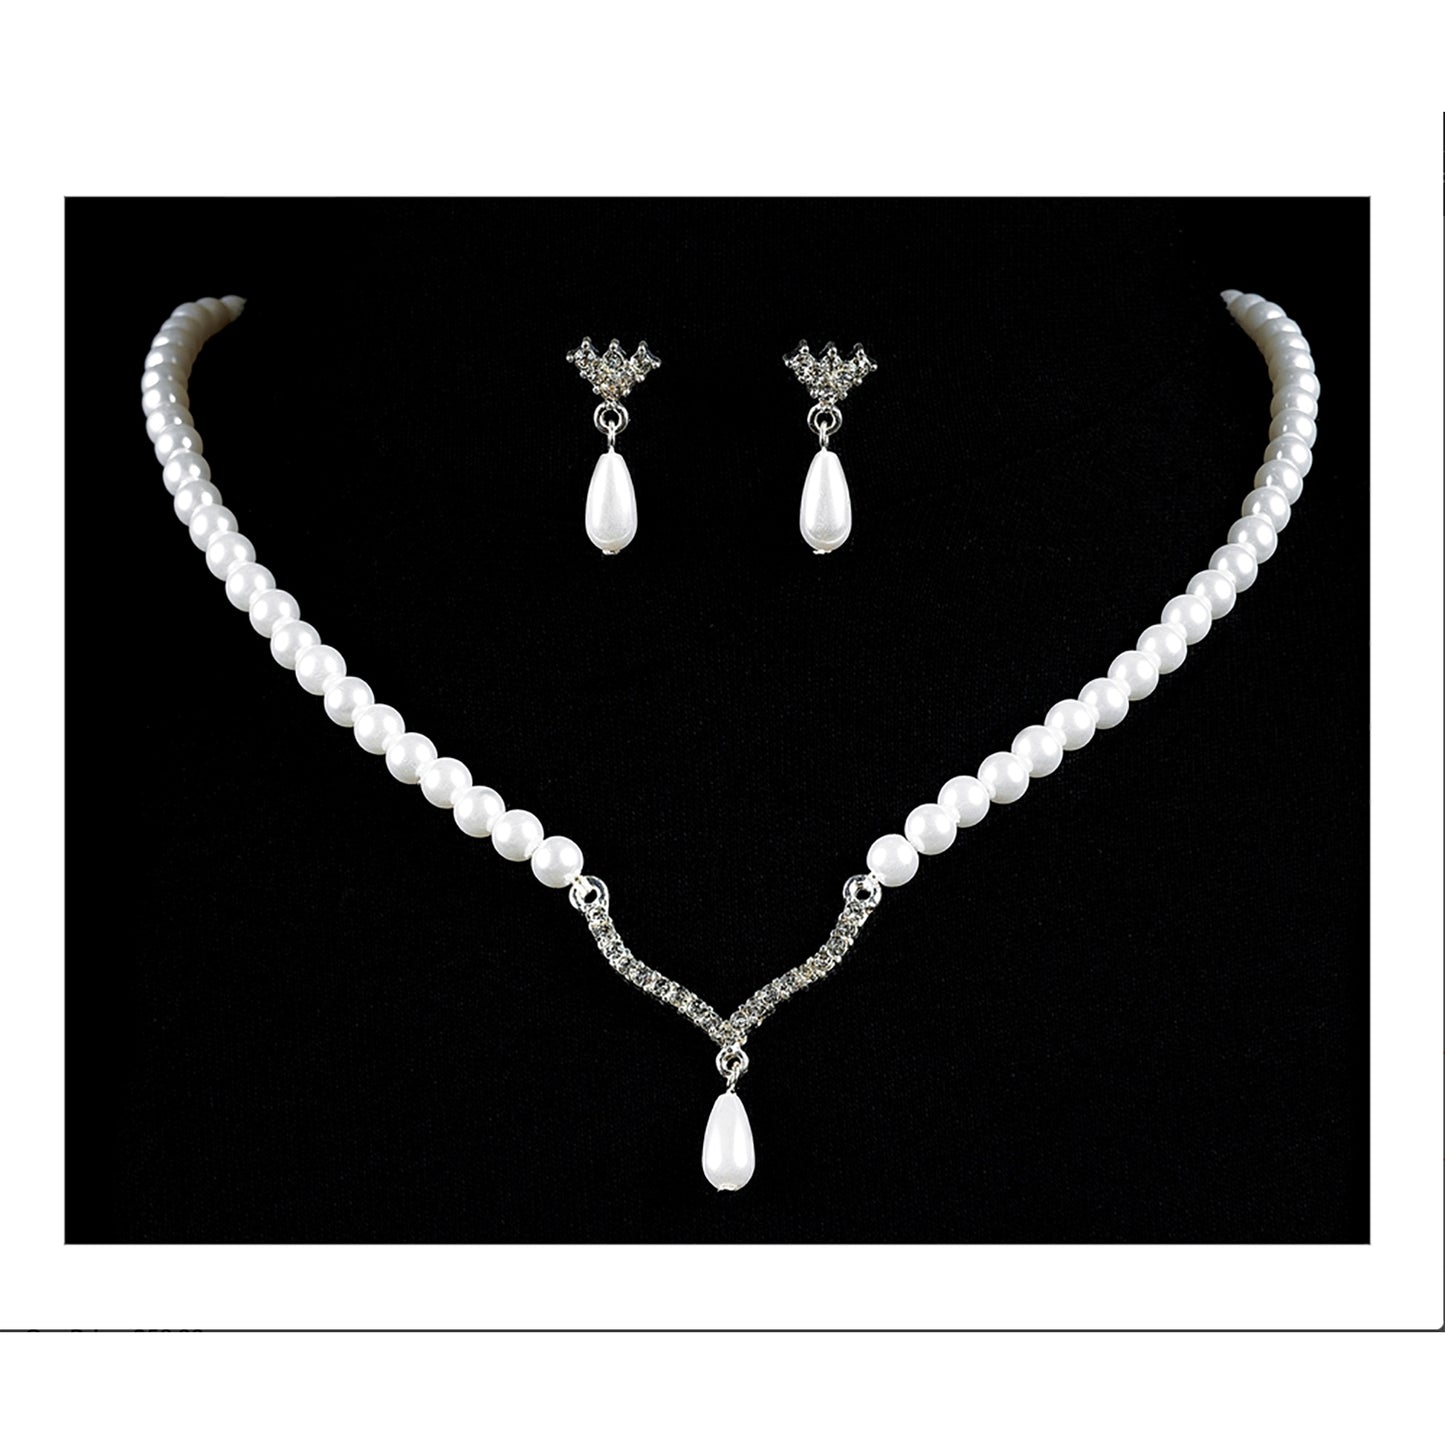 Pearl Teardrop Necklace with Matching Drop Earrings Set